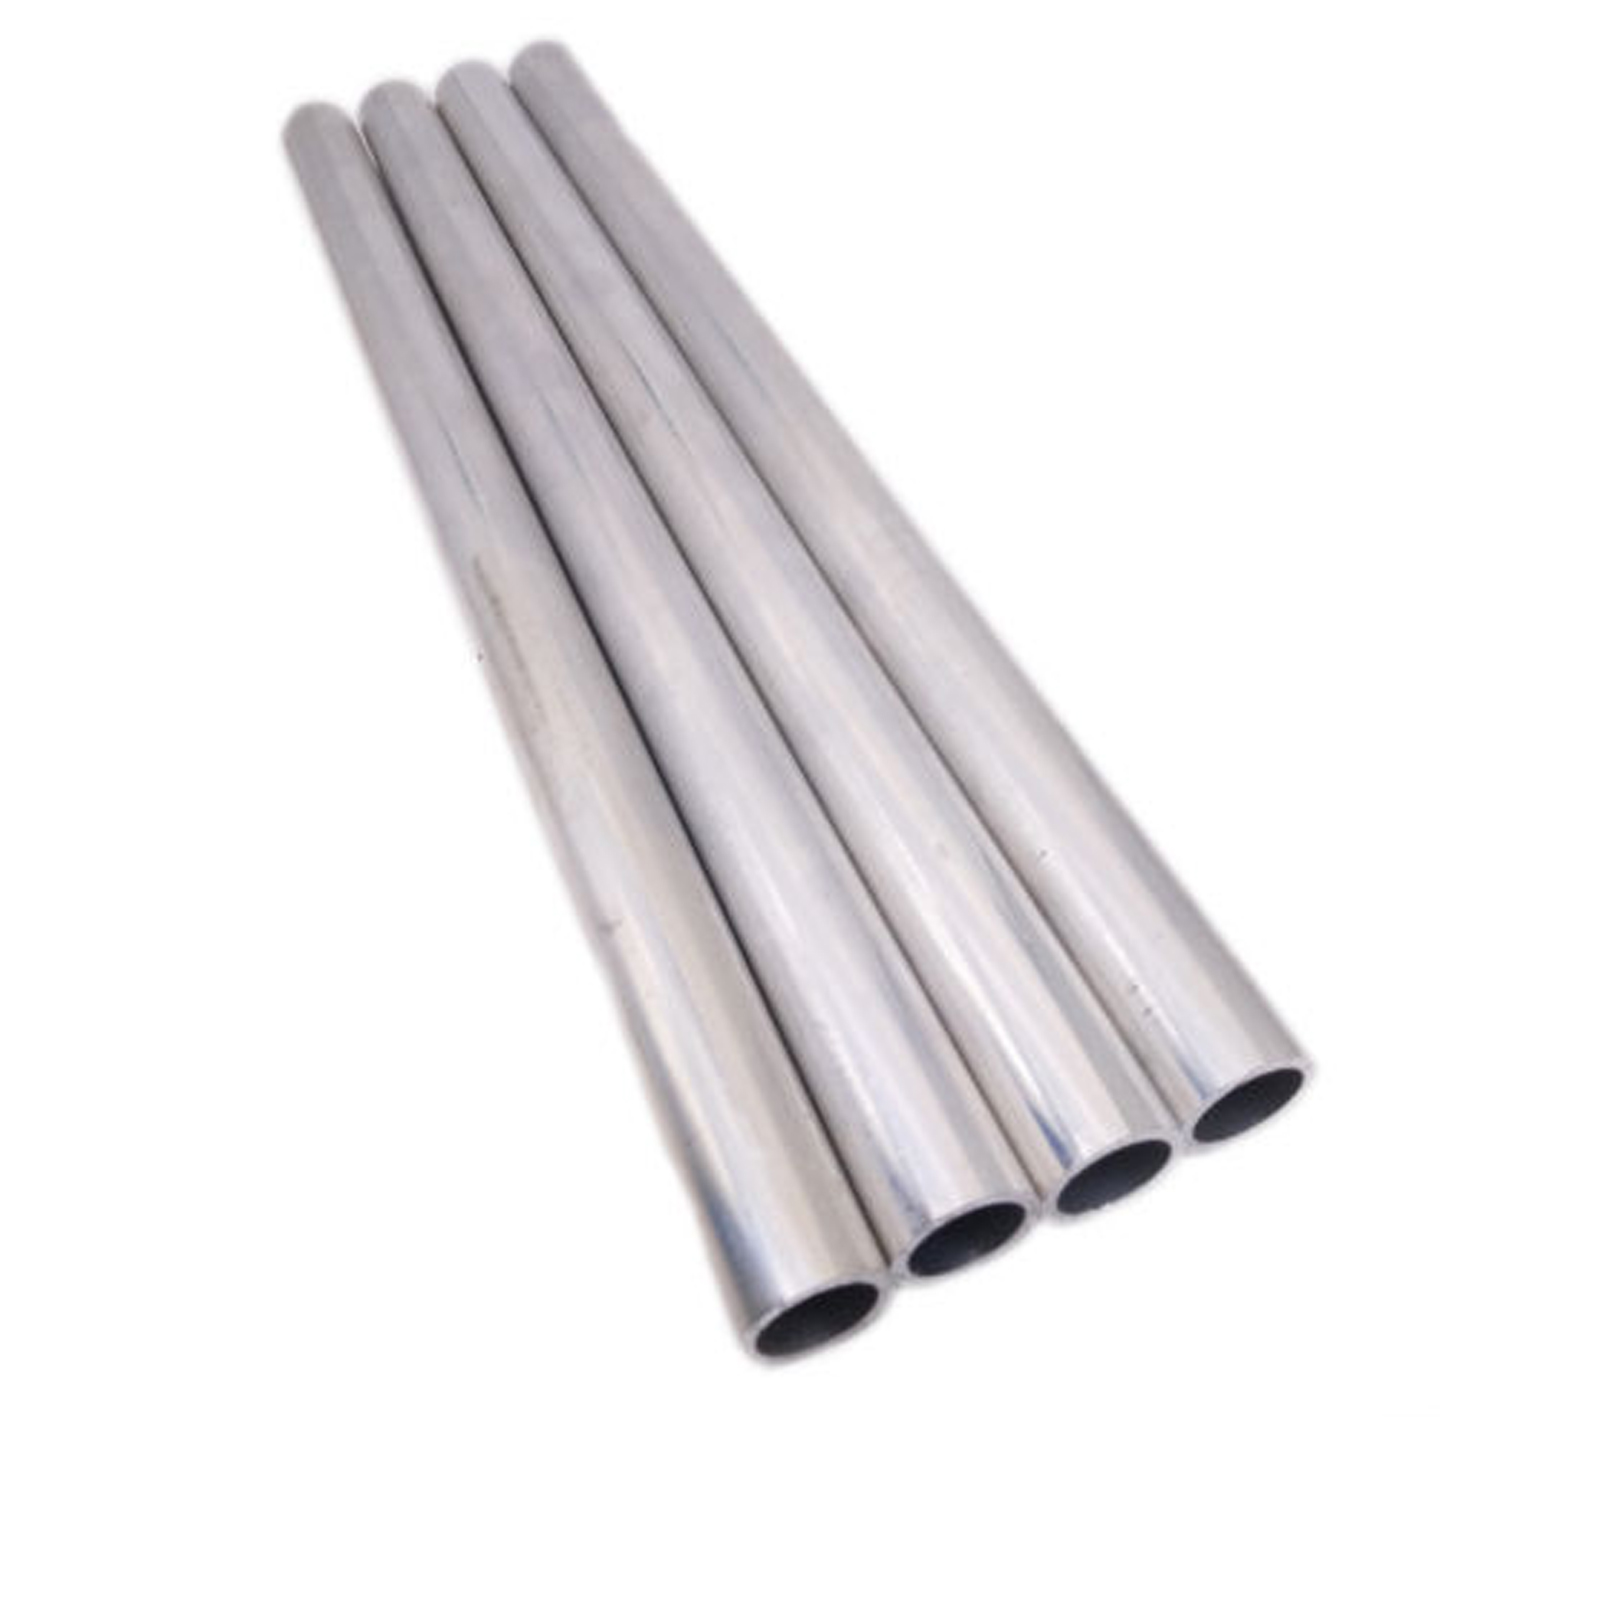 Aluminum 6063 Alloy Tube 400/500mm Long Round Straight Pipe Wall 2mm OD 6-22mm